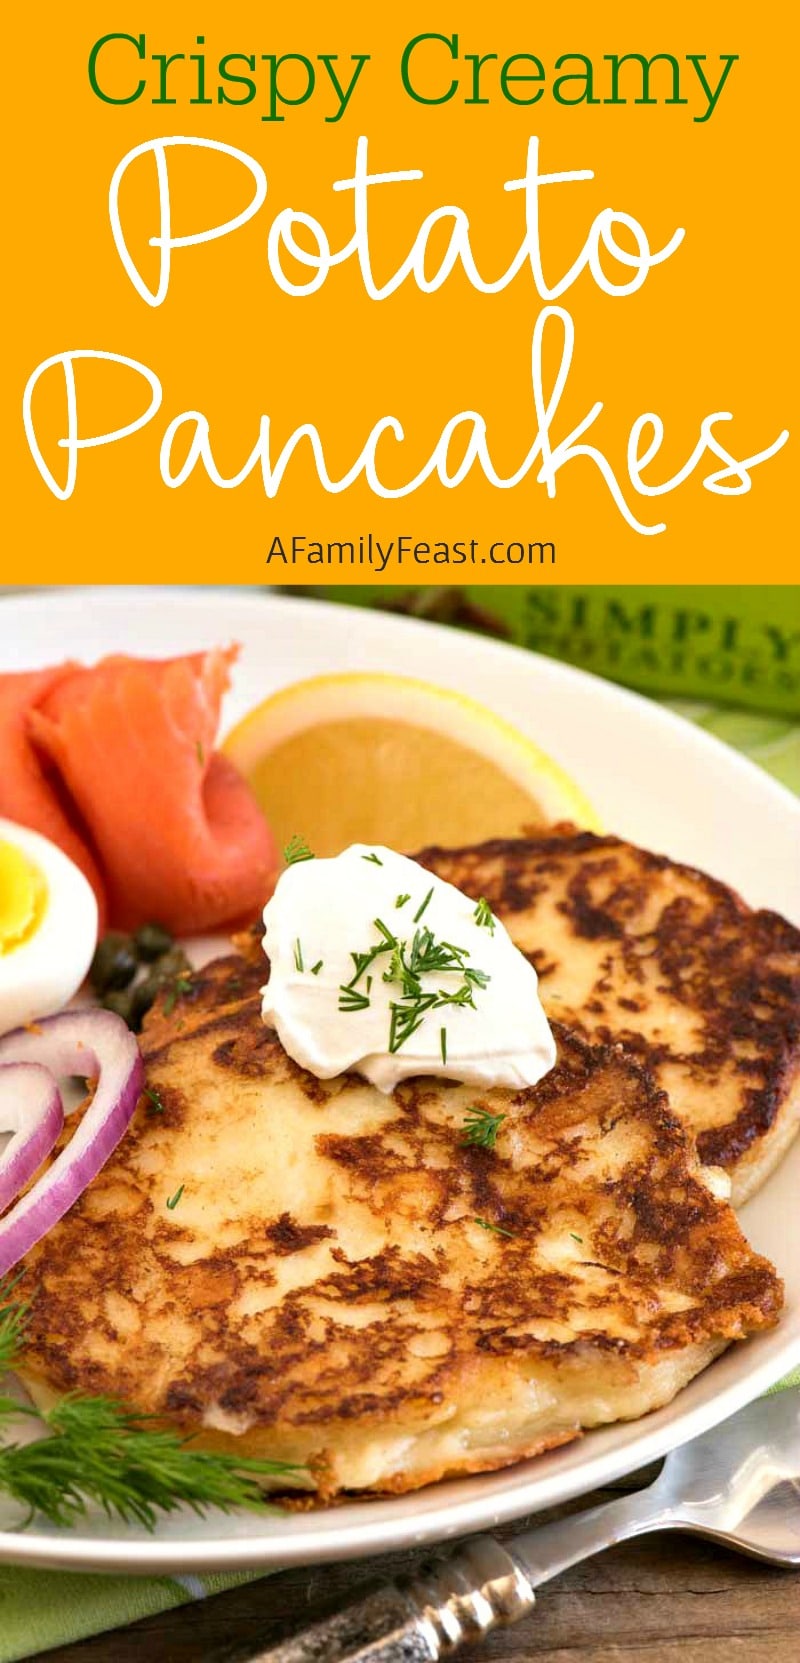 Crispy Creamy Potato Pancakes - Potato pancakes have never been so crispy on the outside and creamy on the inside!